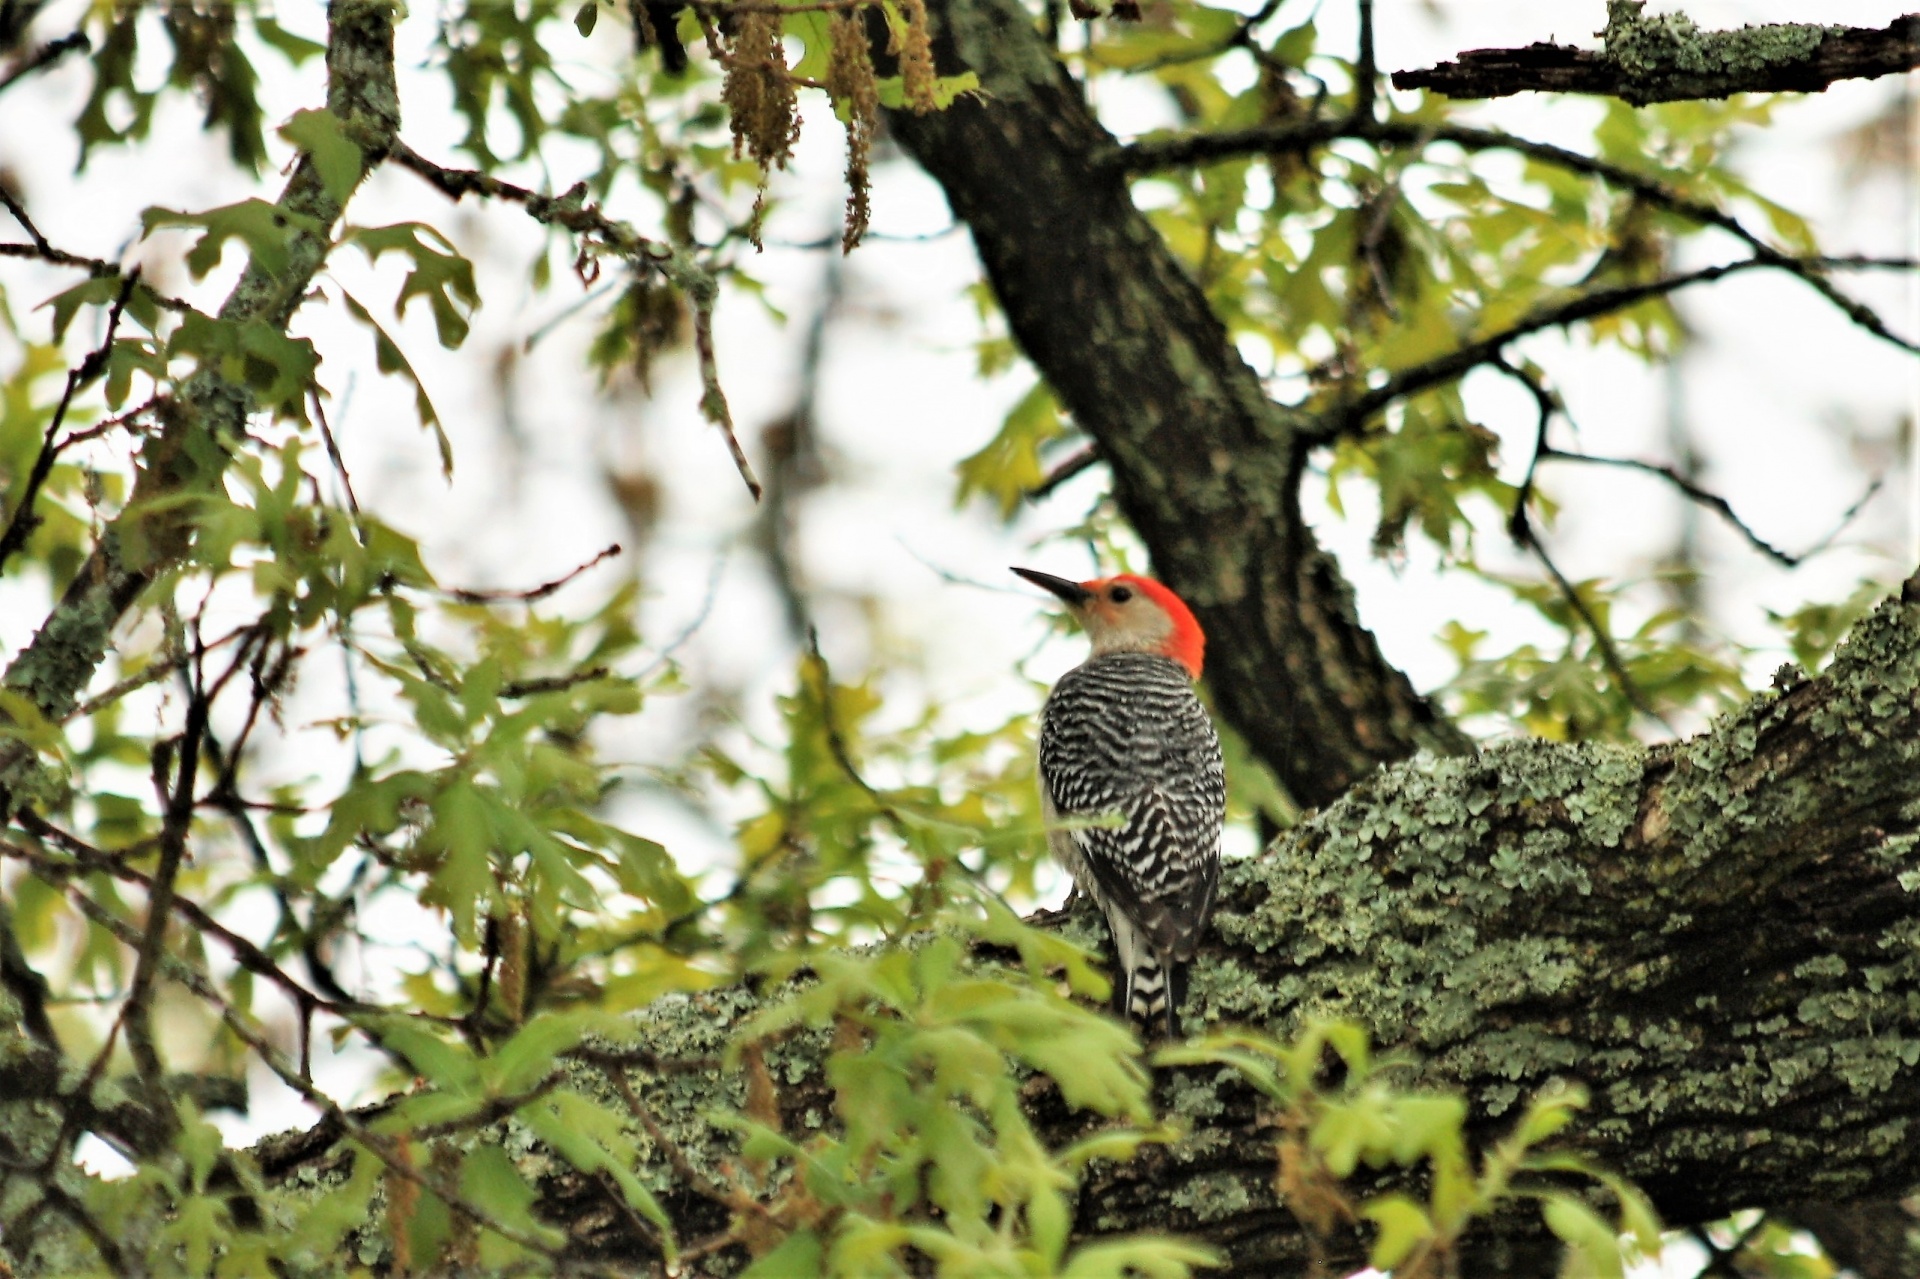 A red-bellied woodpecker sitting an oak tree surrounded by early spring leaves.